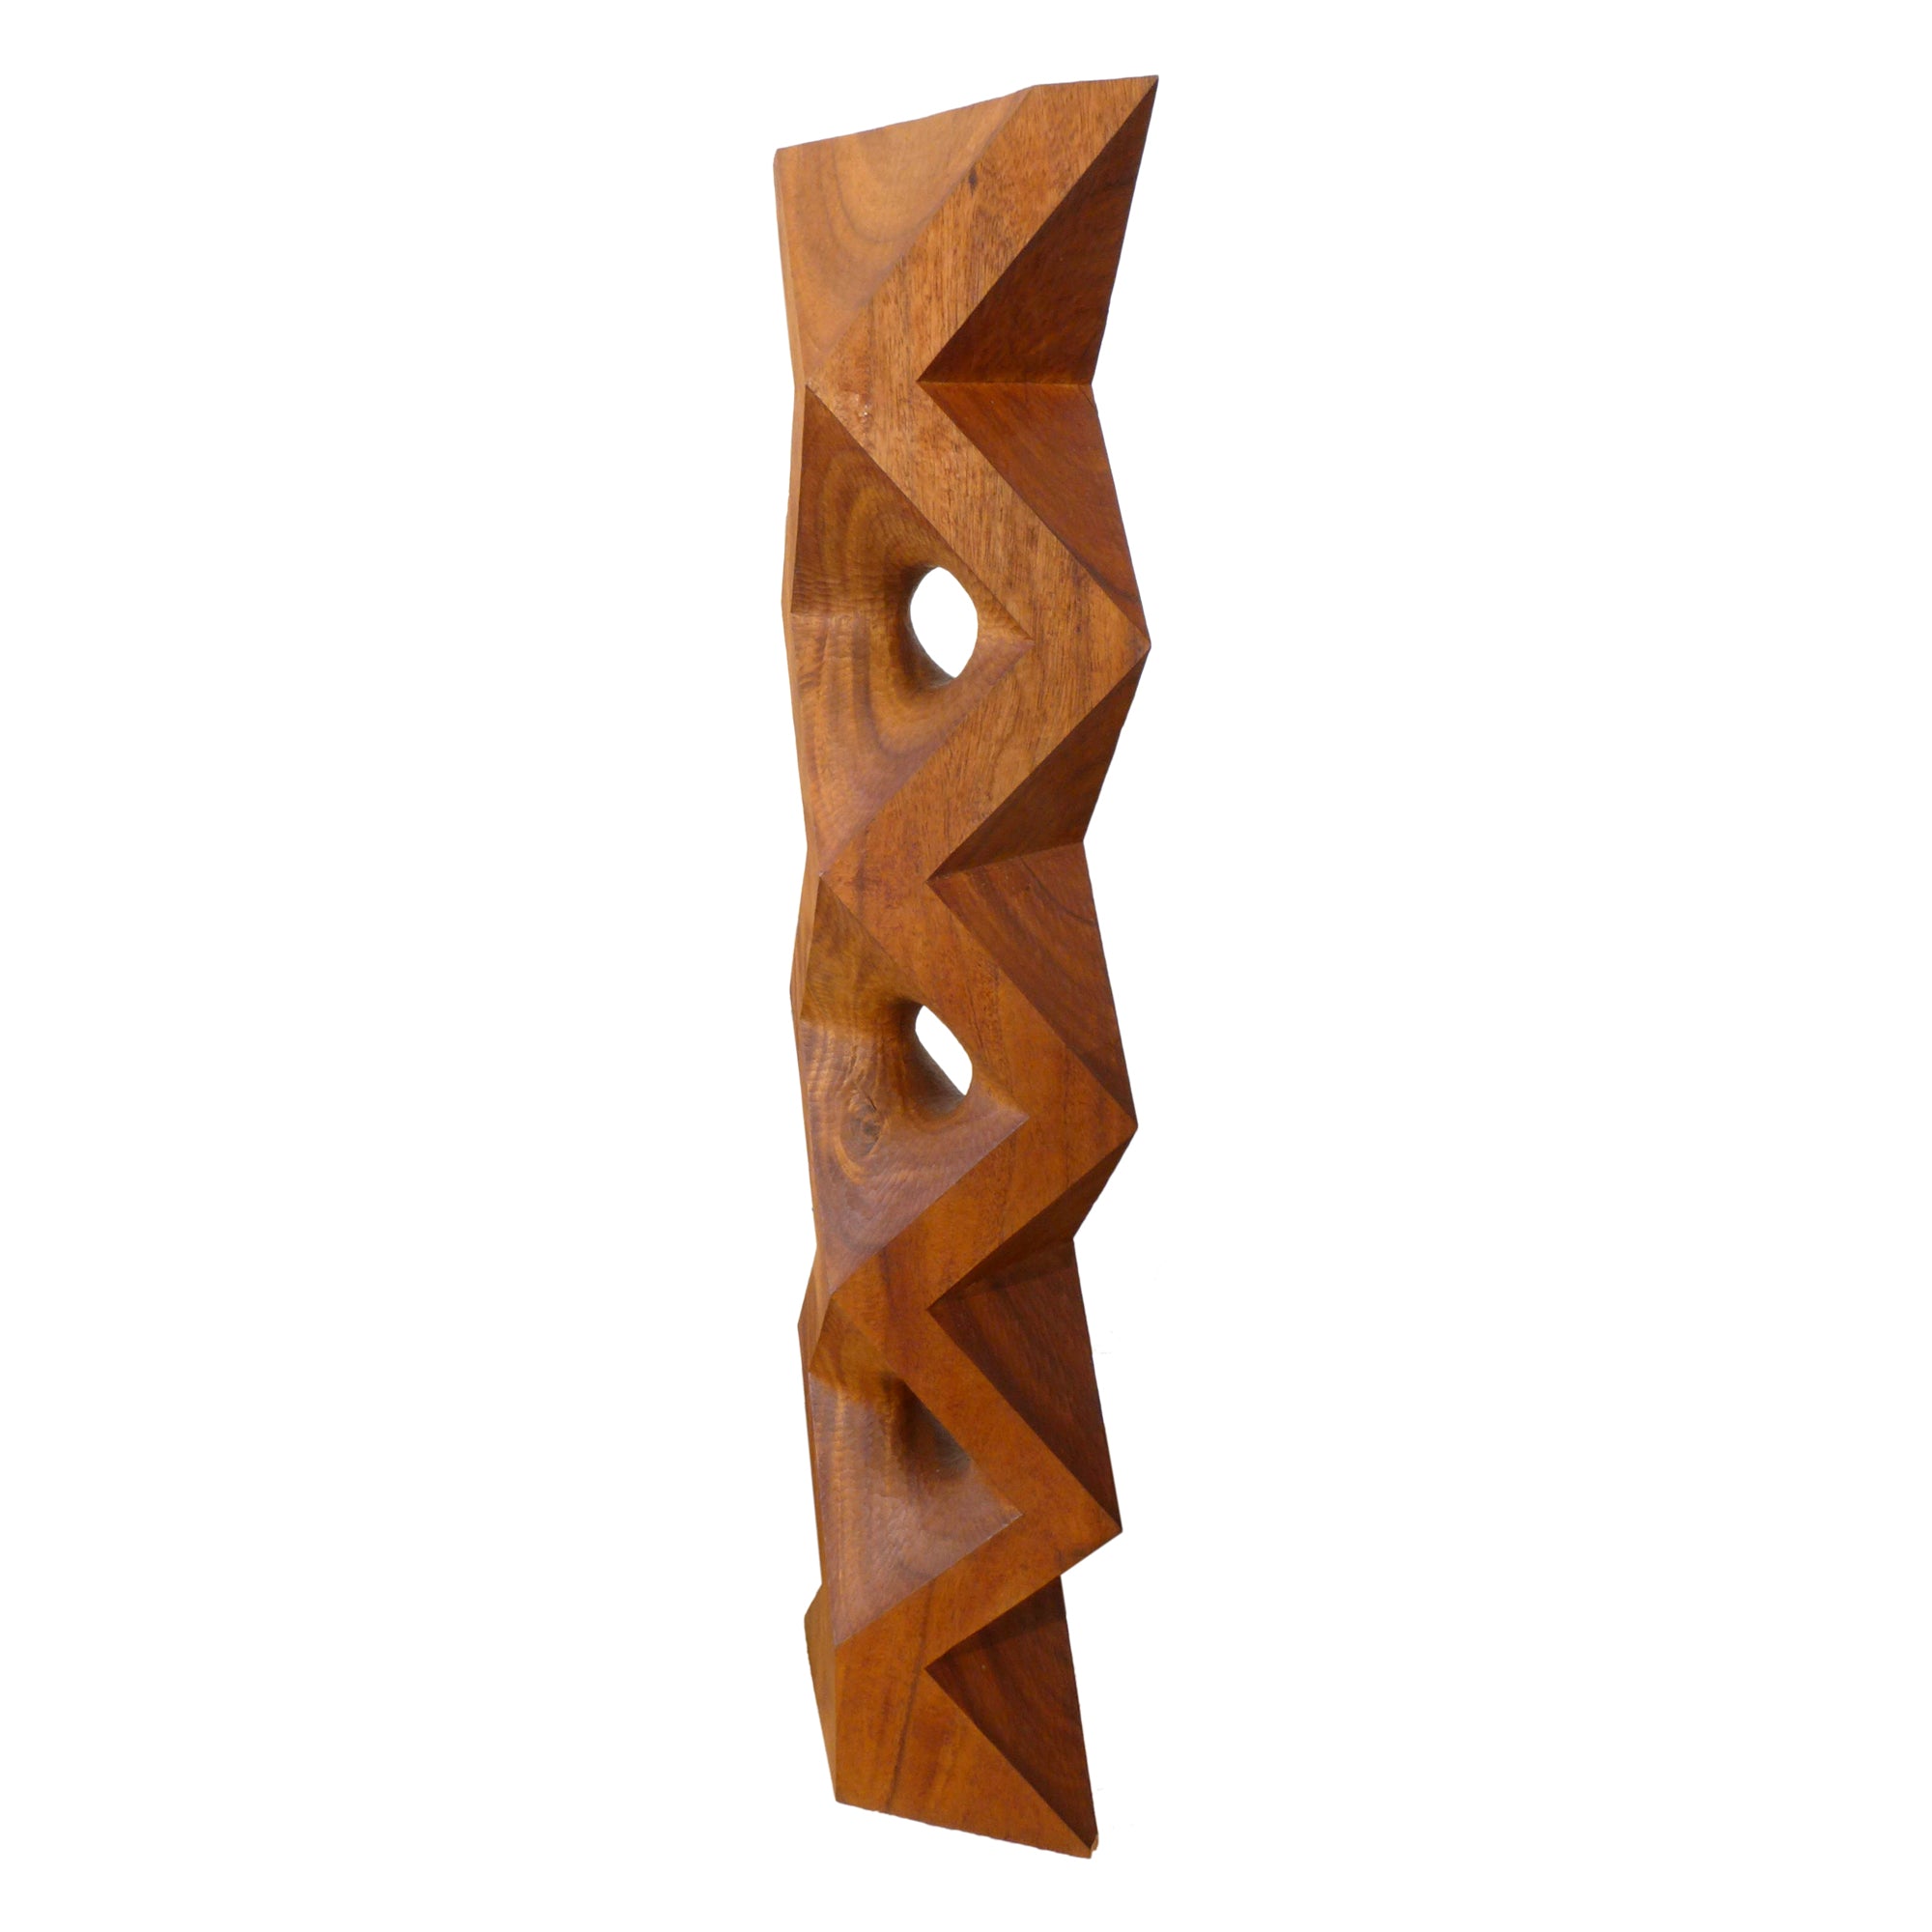 Contemporary Carved Wood Punctured Geometric Totem Sculpture by Aleph Geddis